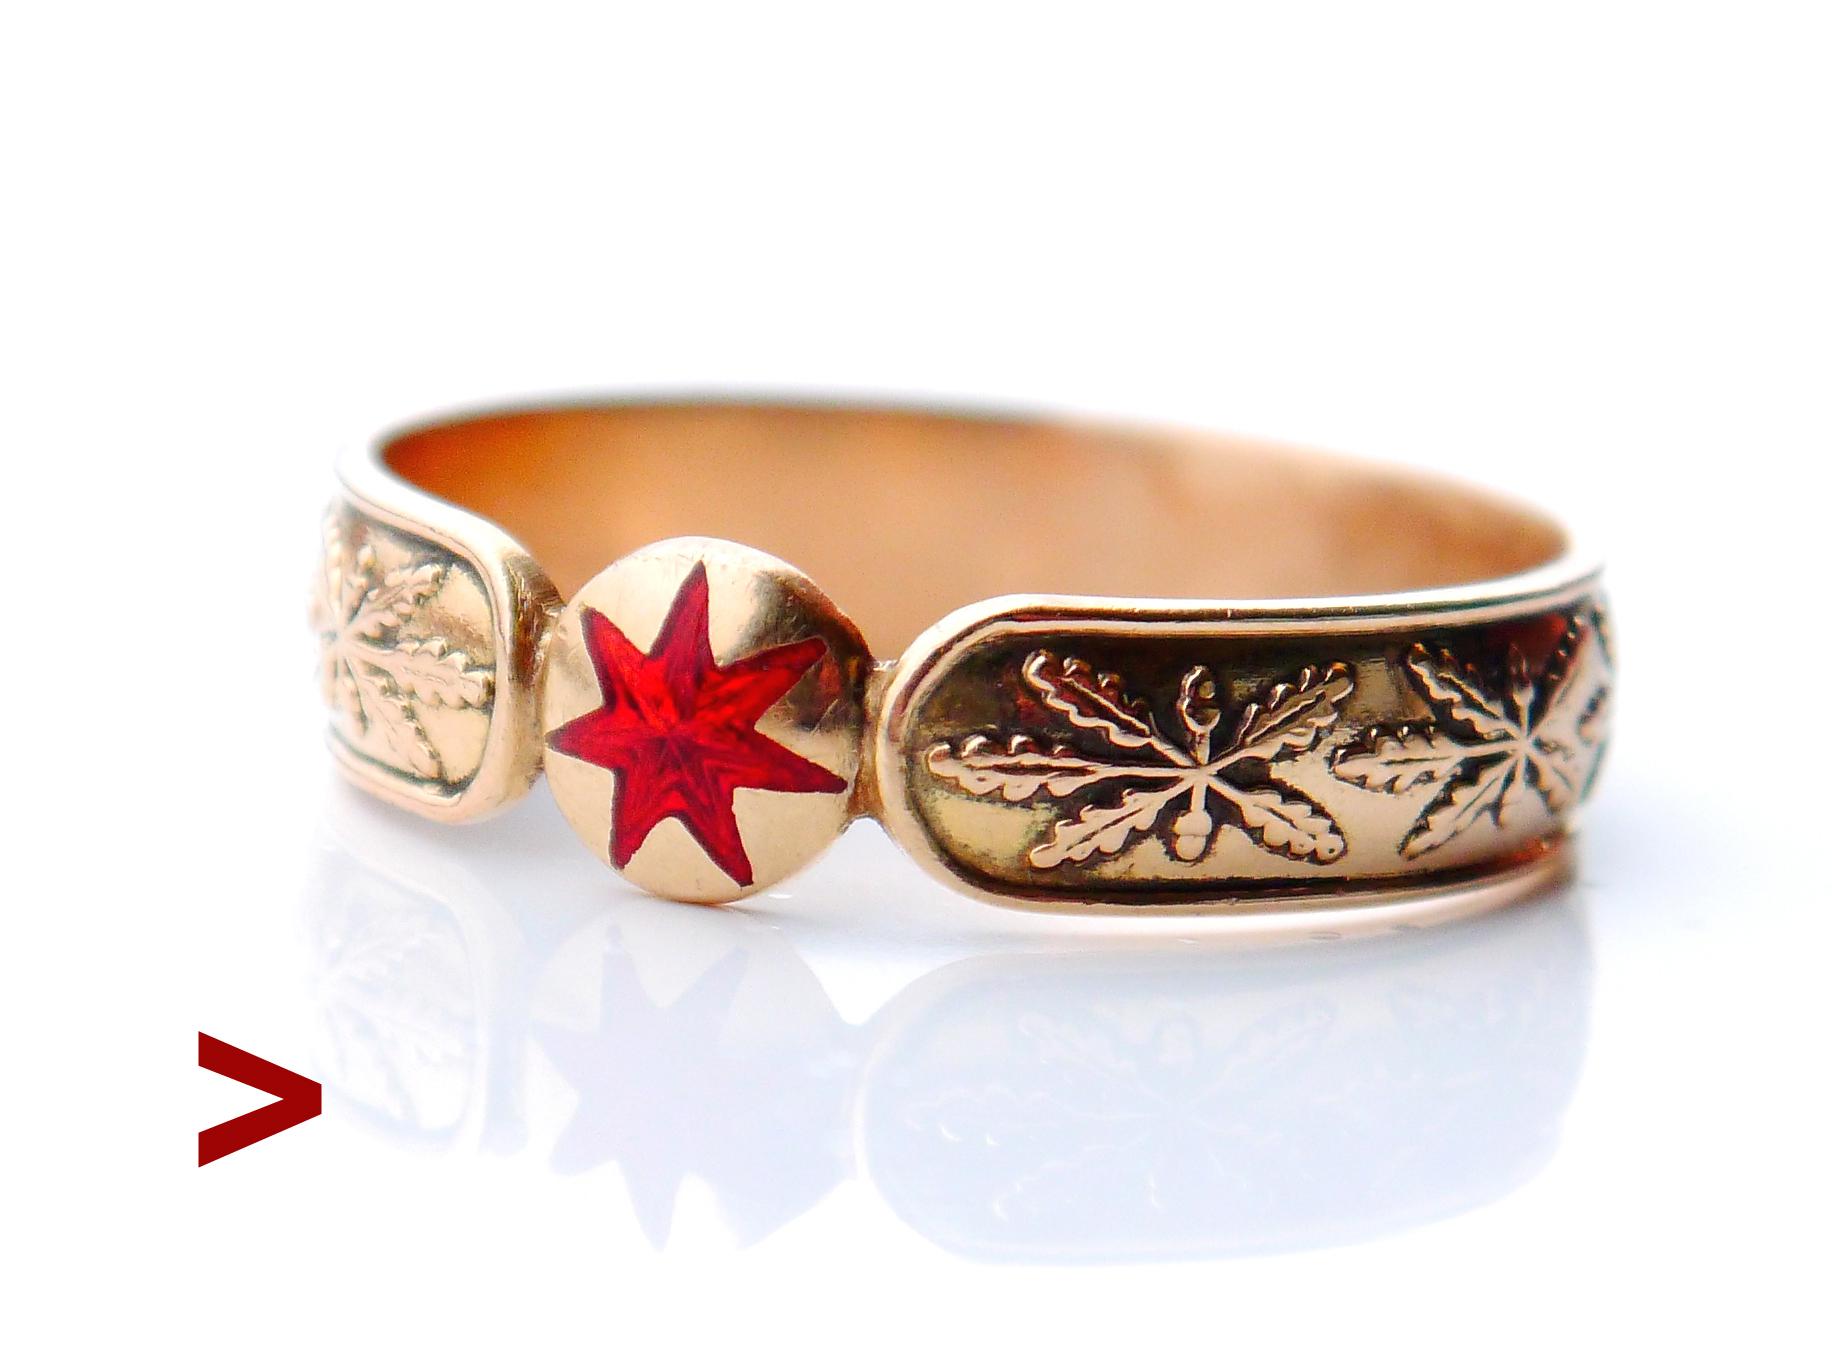 Old ring in solid 18K Yellow Gold featuring seven pointed Blazing Star in Red Enamel and band with profile ornament of oak leaves & acorns. Can be some type of Occult ring. Likely ceremonial to be worn on top of the glove, and that may explain its